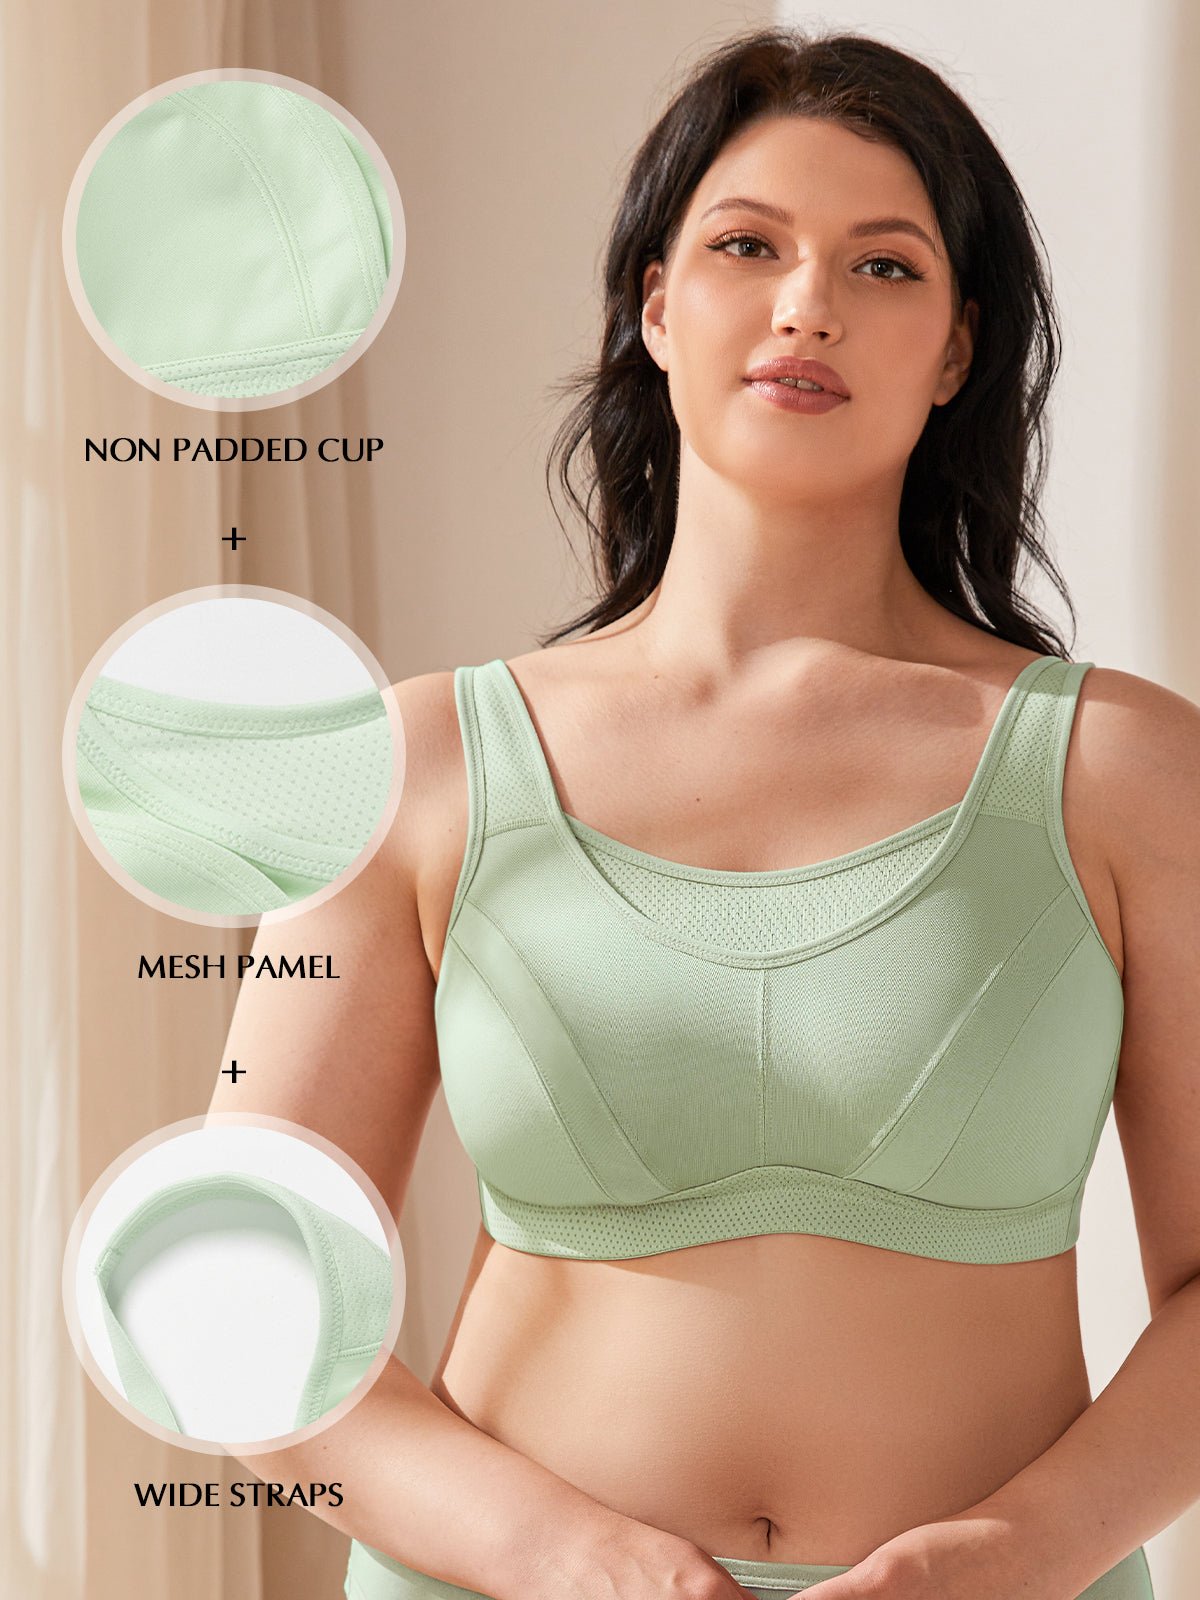 IFG Bras vs.  Bras: A Comparison of Imported Bra